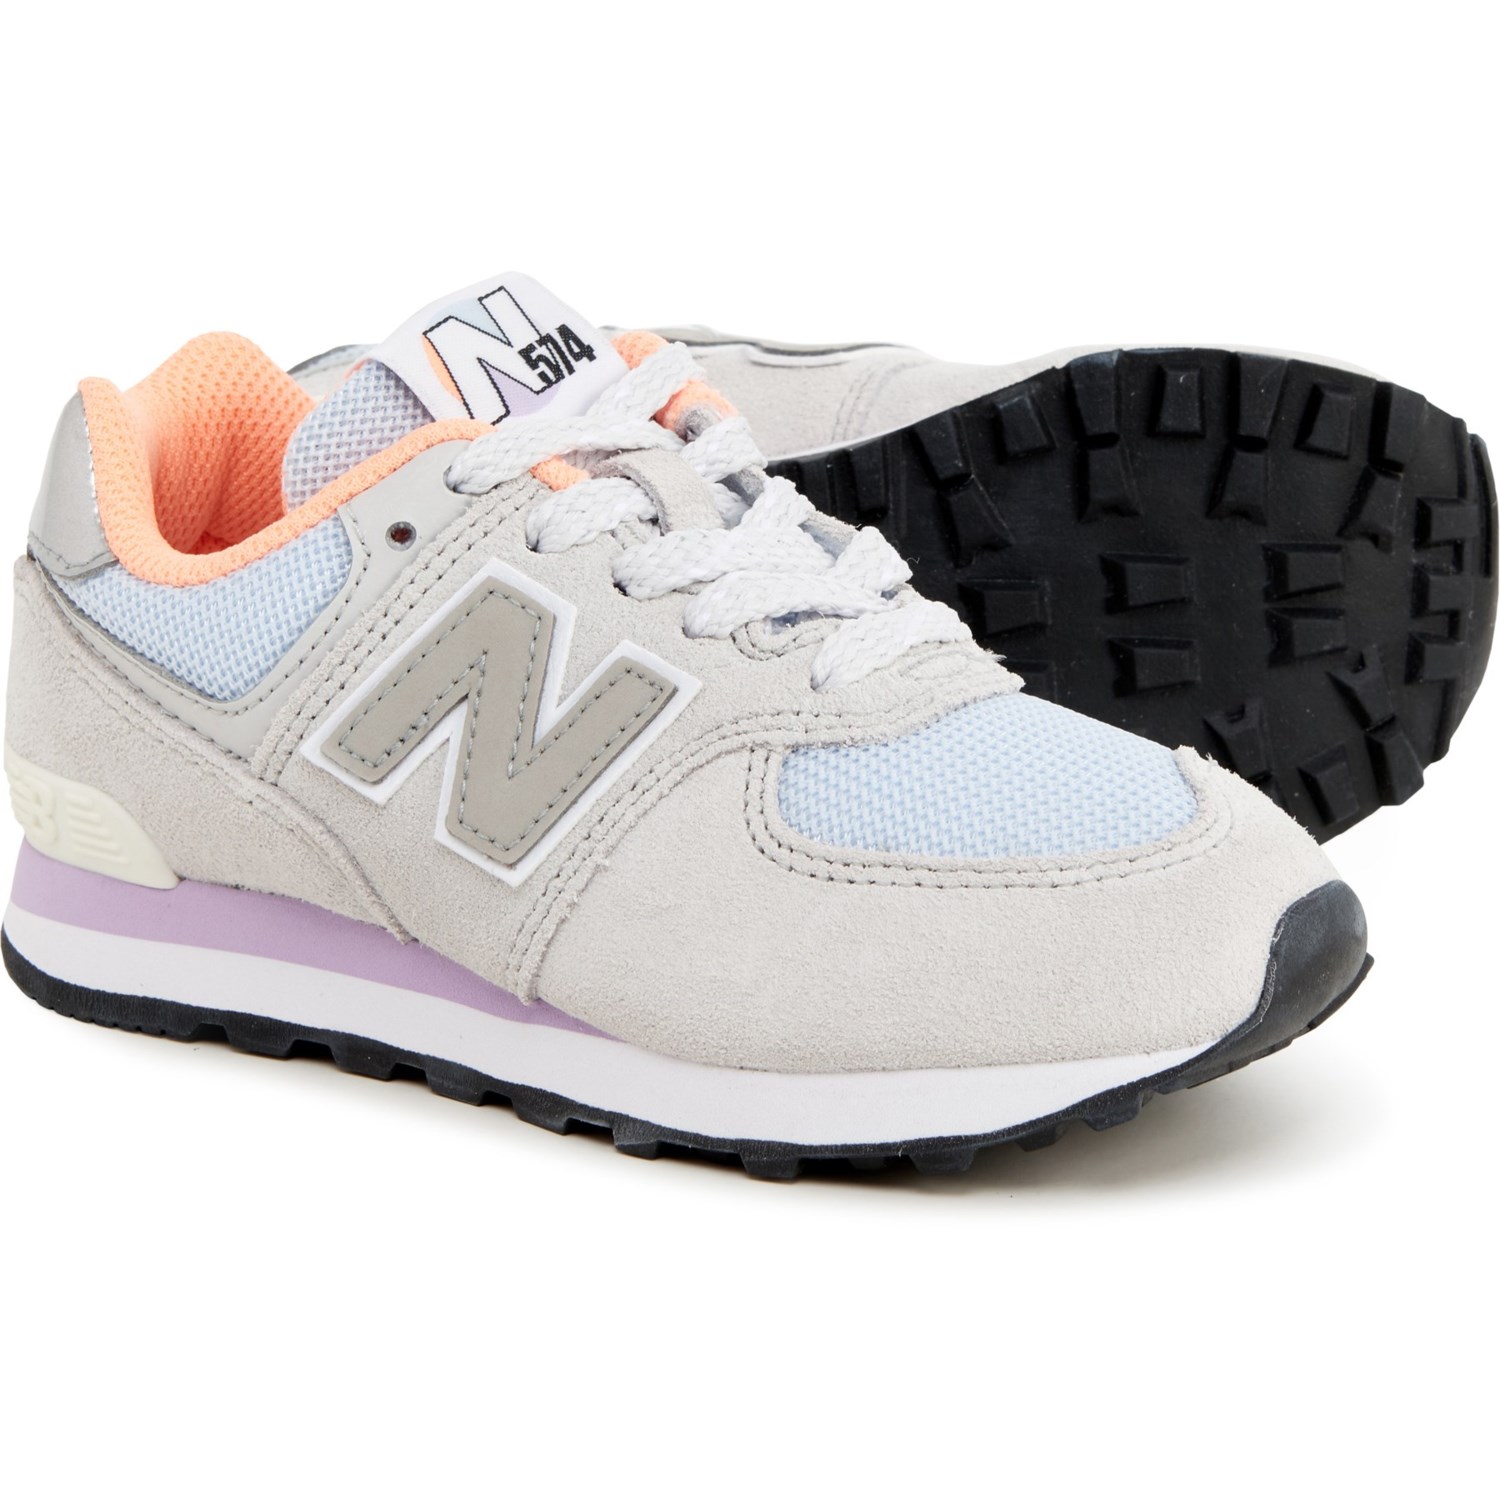 New Balance Toddler Girls 574 Lace-Up Sneakers